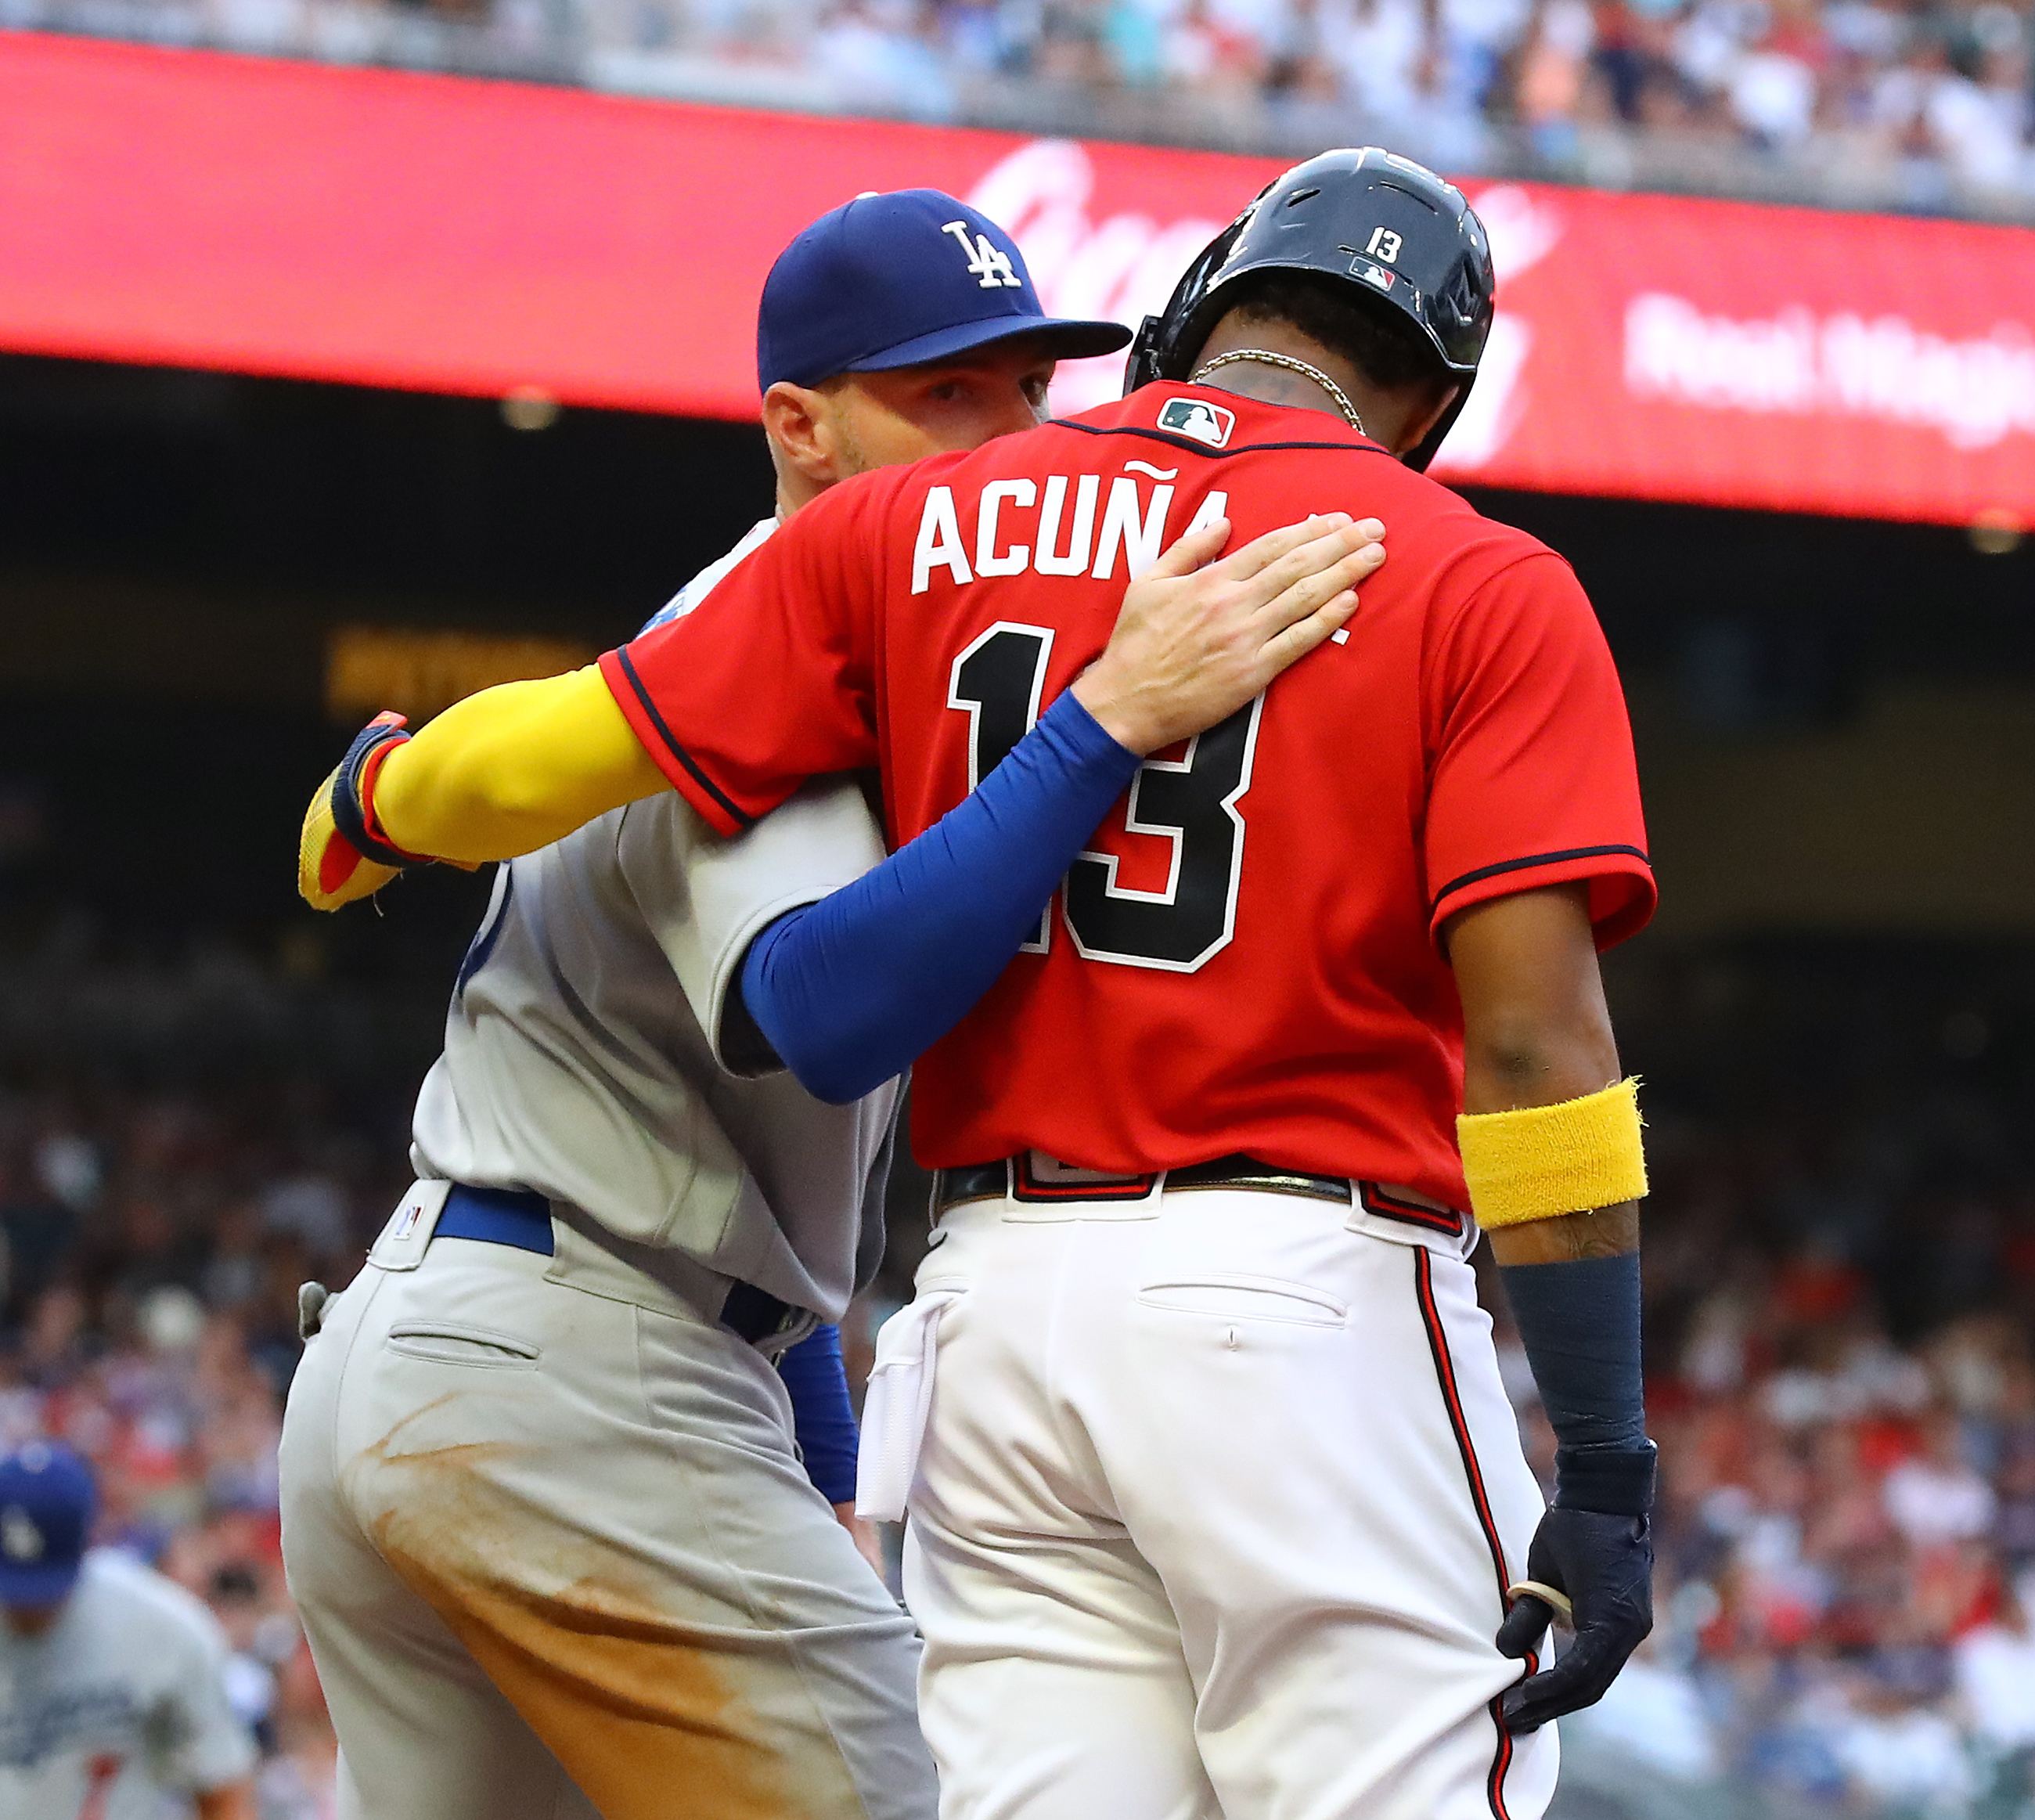 Braves outfielder Ronald Acuna is hugged by Los Angeles Dodgers first baseman Freddie Freeman after taking a walk in the first inning of an MLB baseball game Friday, June 24, 2022 in Atlanta.  